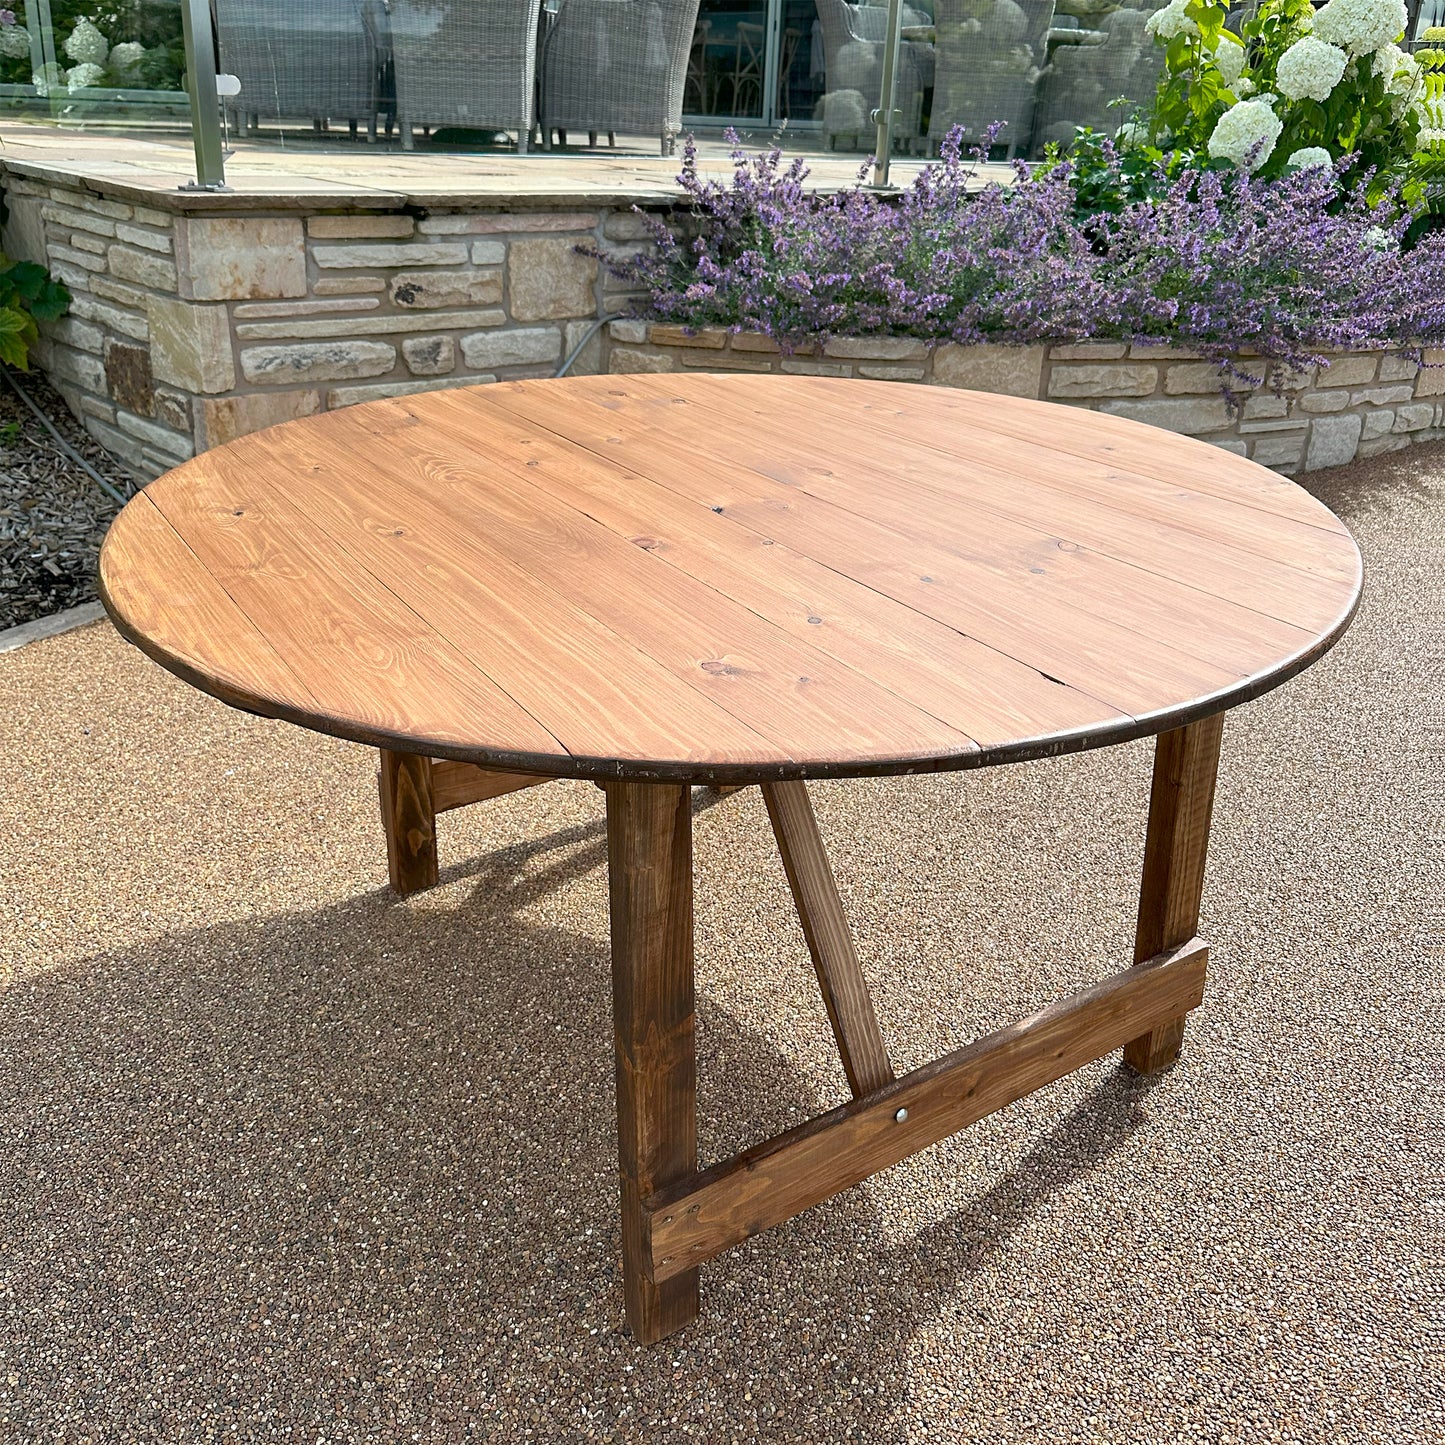 1. Indoor Round Folding Rustic-style Trestle Table